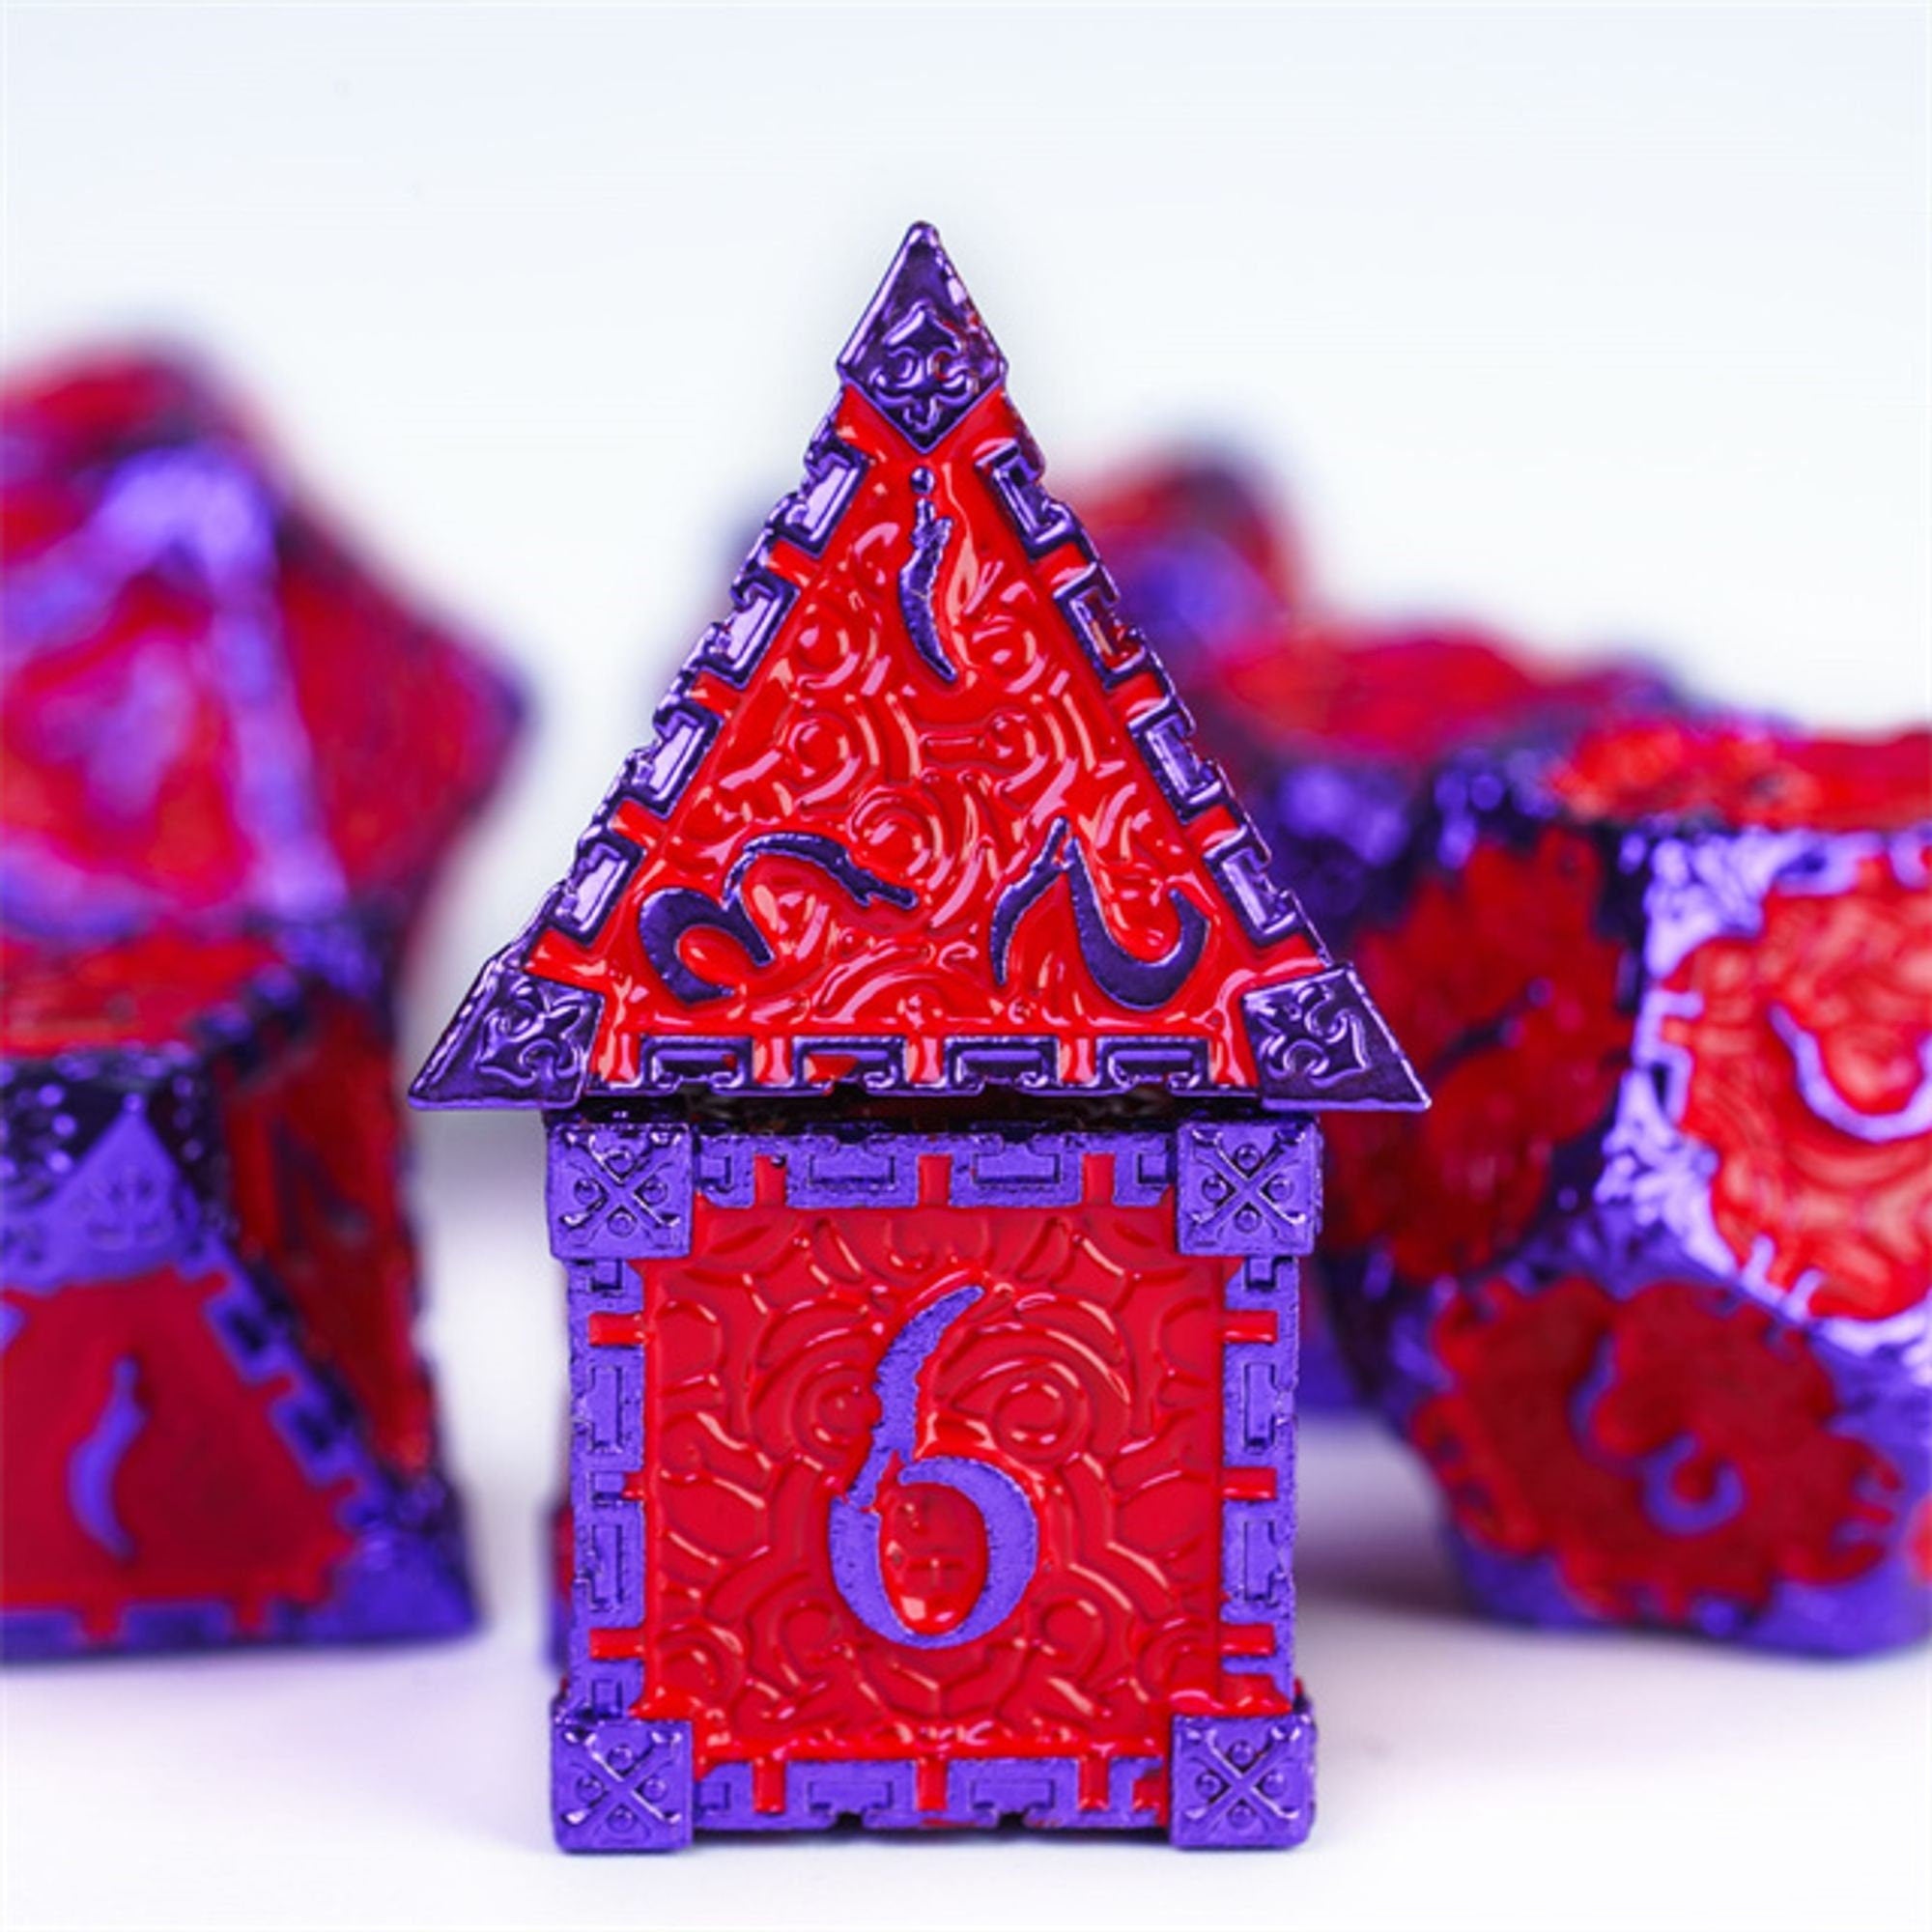 Dagger of Venom Royal Purple and Red Metal Rogue Style DND/TTRPG Dice set - Dicemaniac